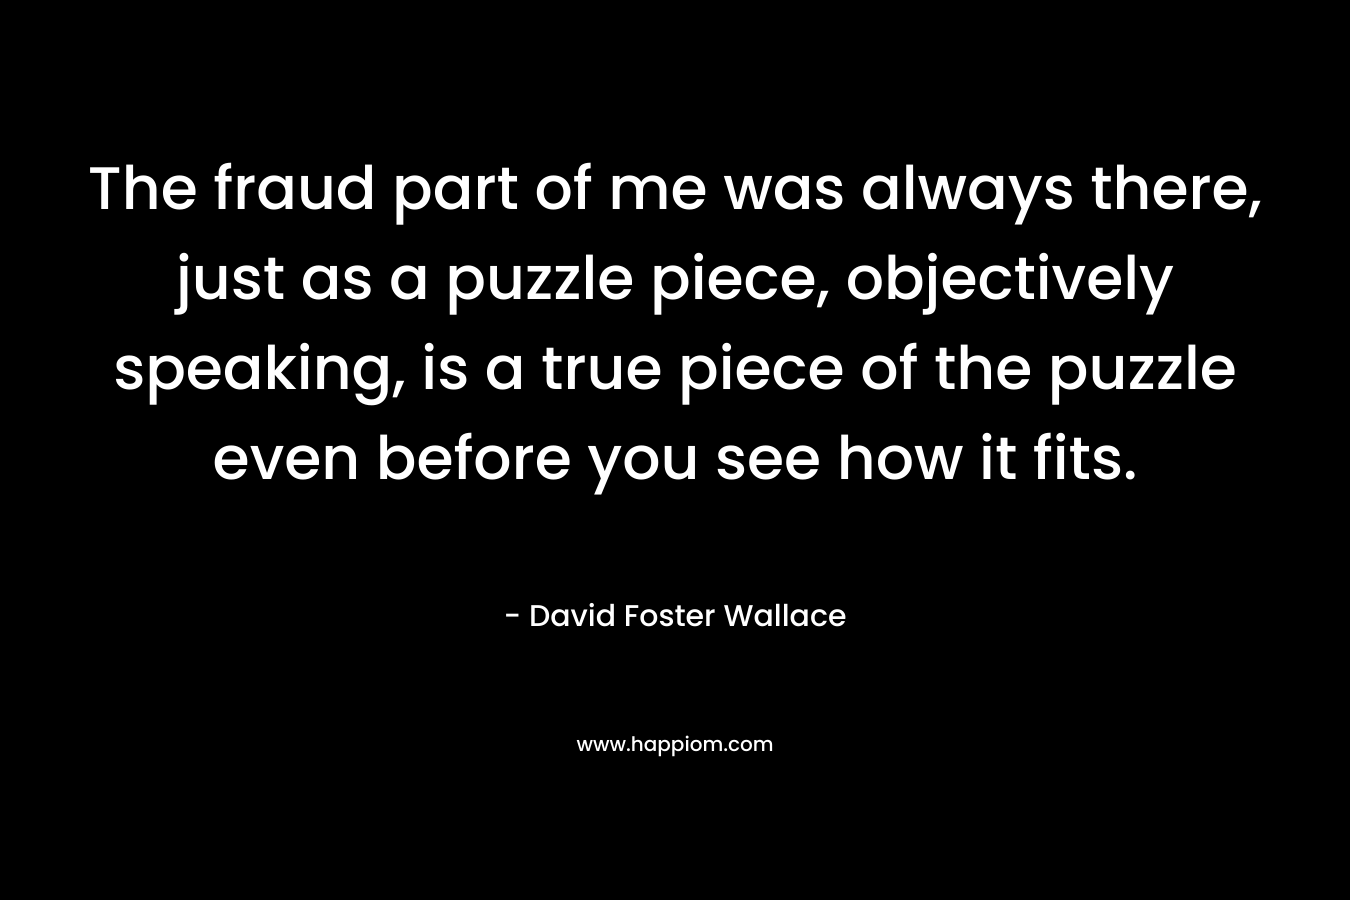 The fraud part of me was always there, just as a puzzle piece, objectively speaking, is a true piece of the puzzle even before you see how it fits.